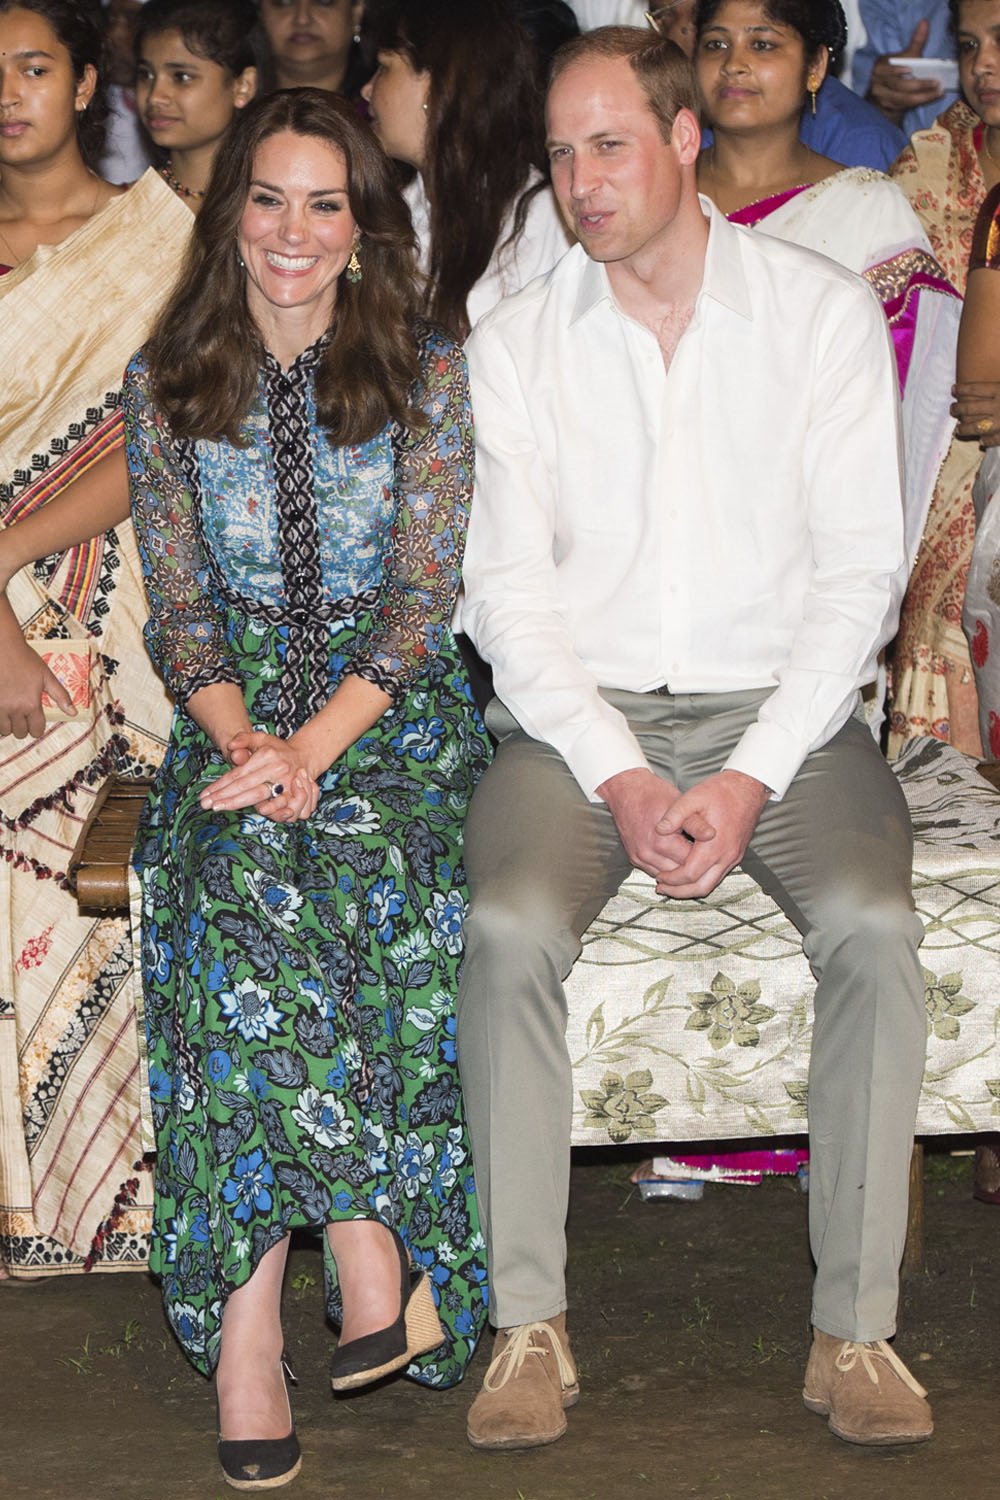 The Duchess dazzled in a turquoise Anna Sui maxi dress at the National Park.